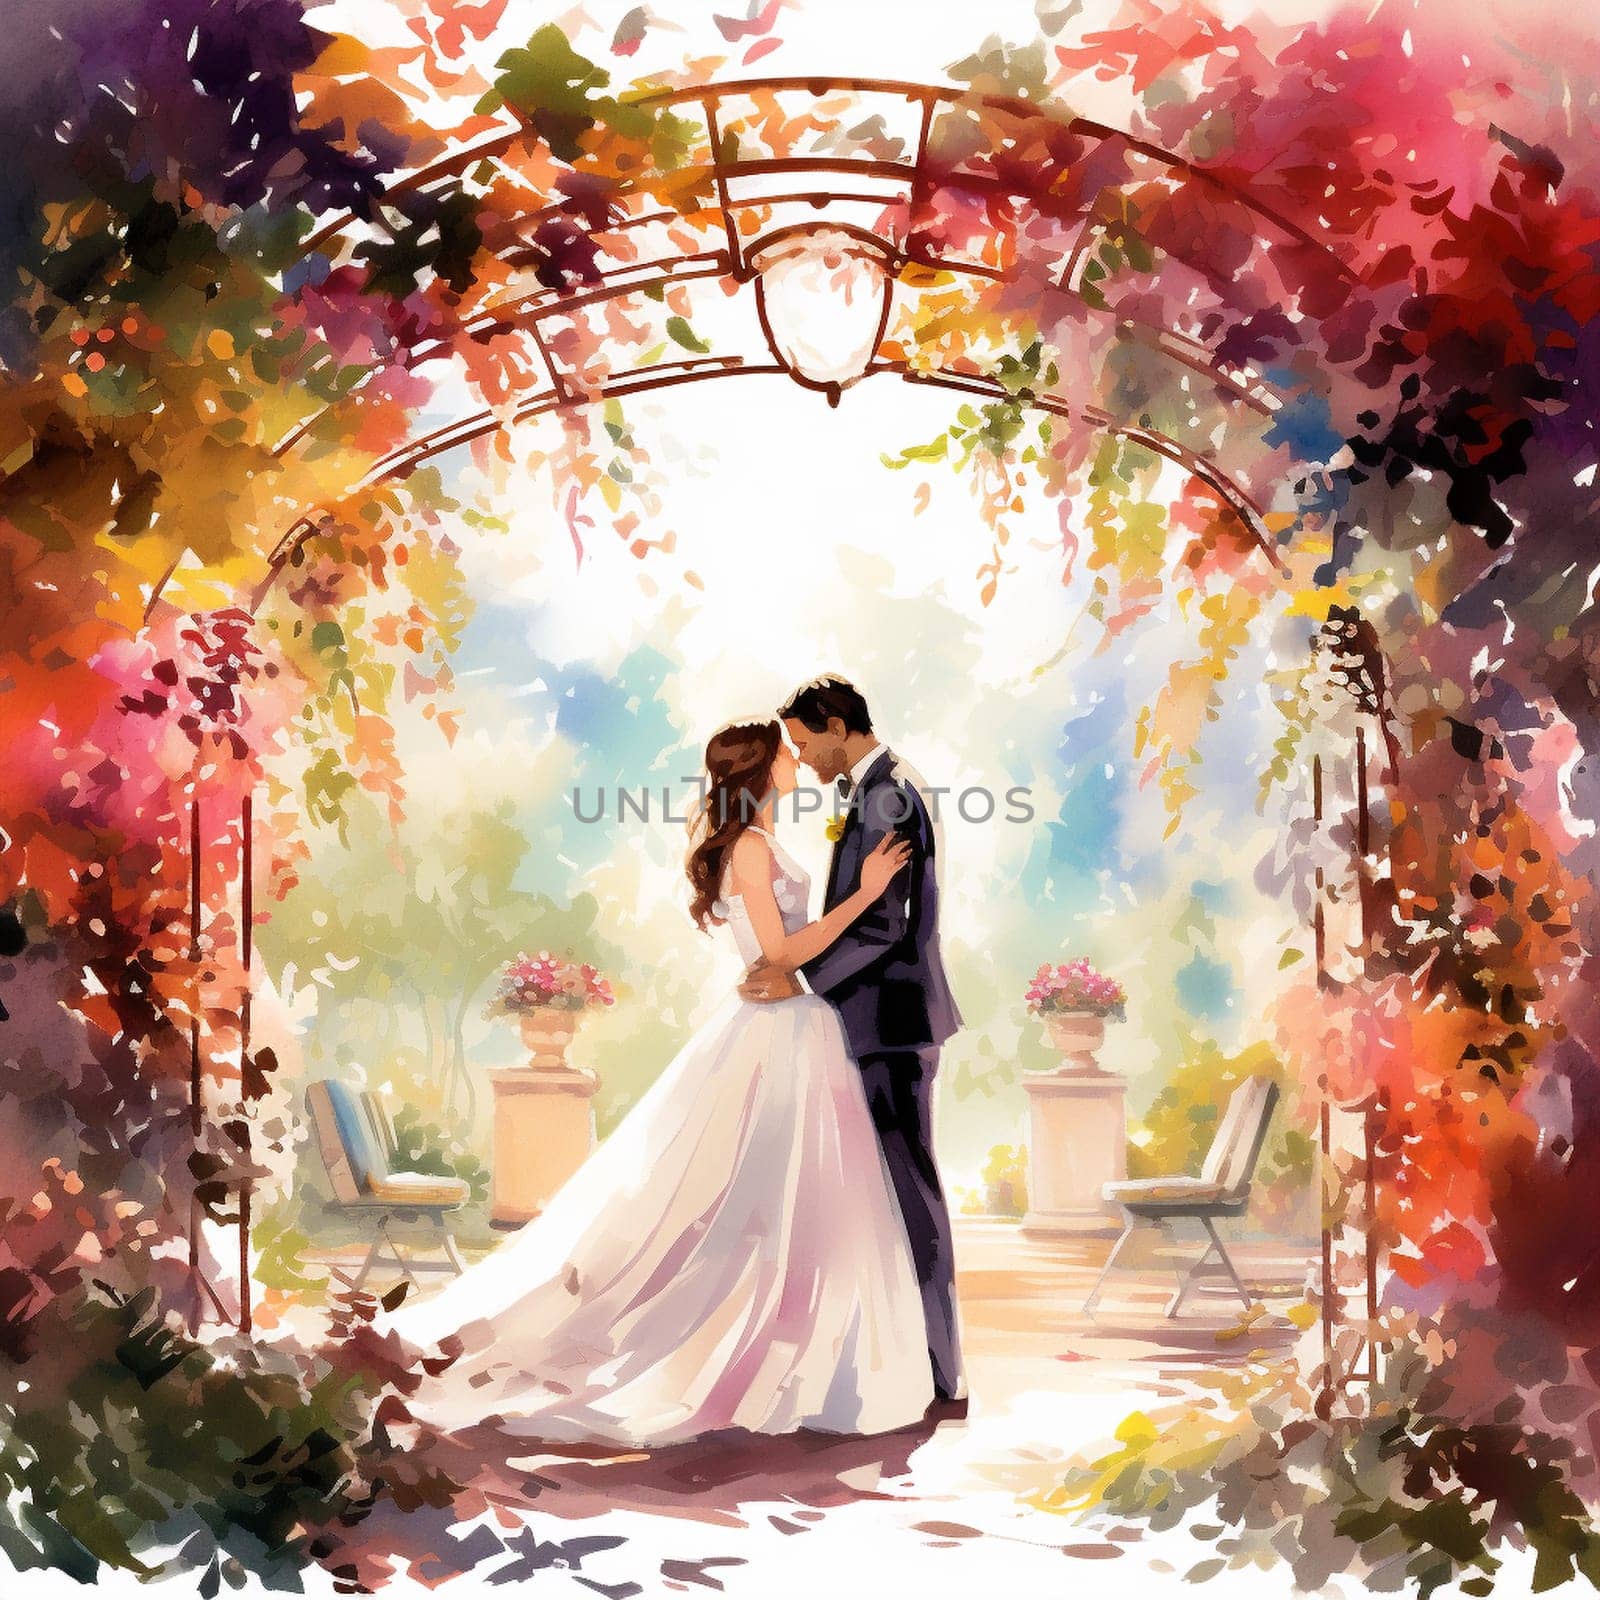 Vibrant Watercolor Painting of Couple Exchanging Vows in Garden Setting by Sahin